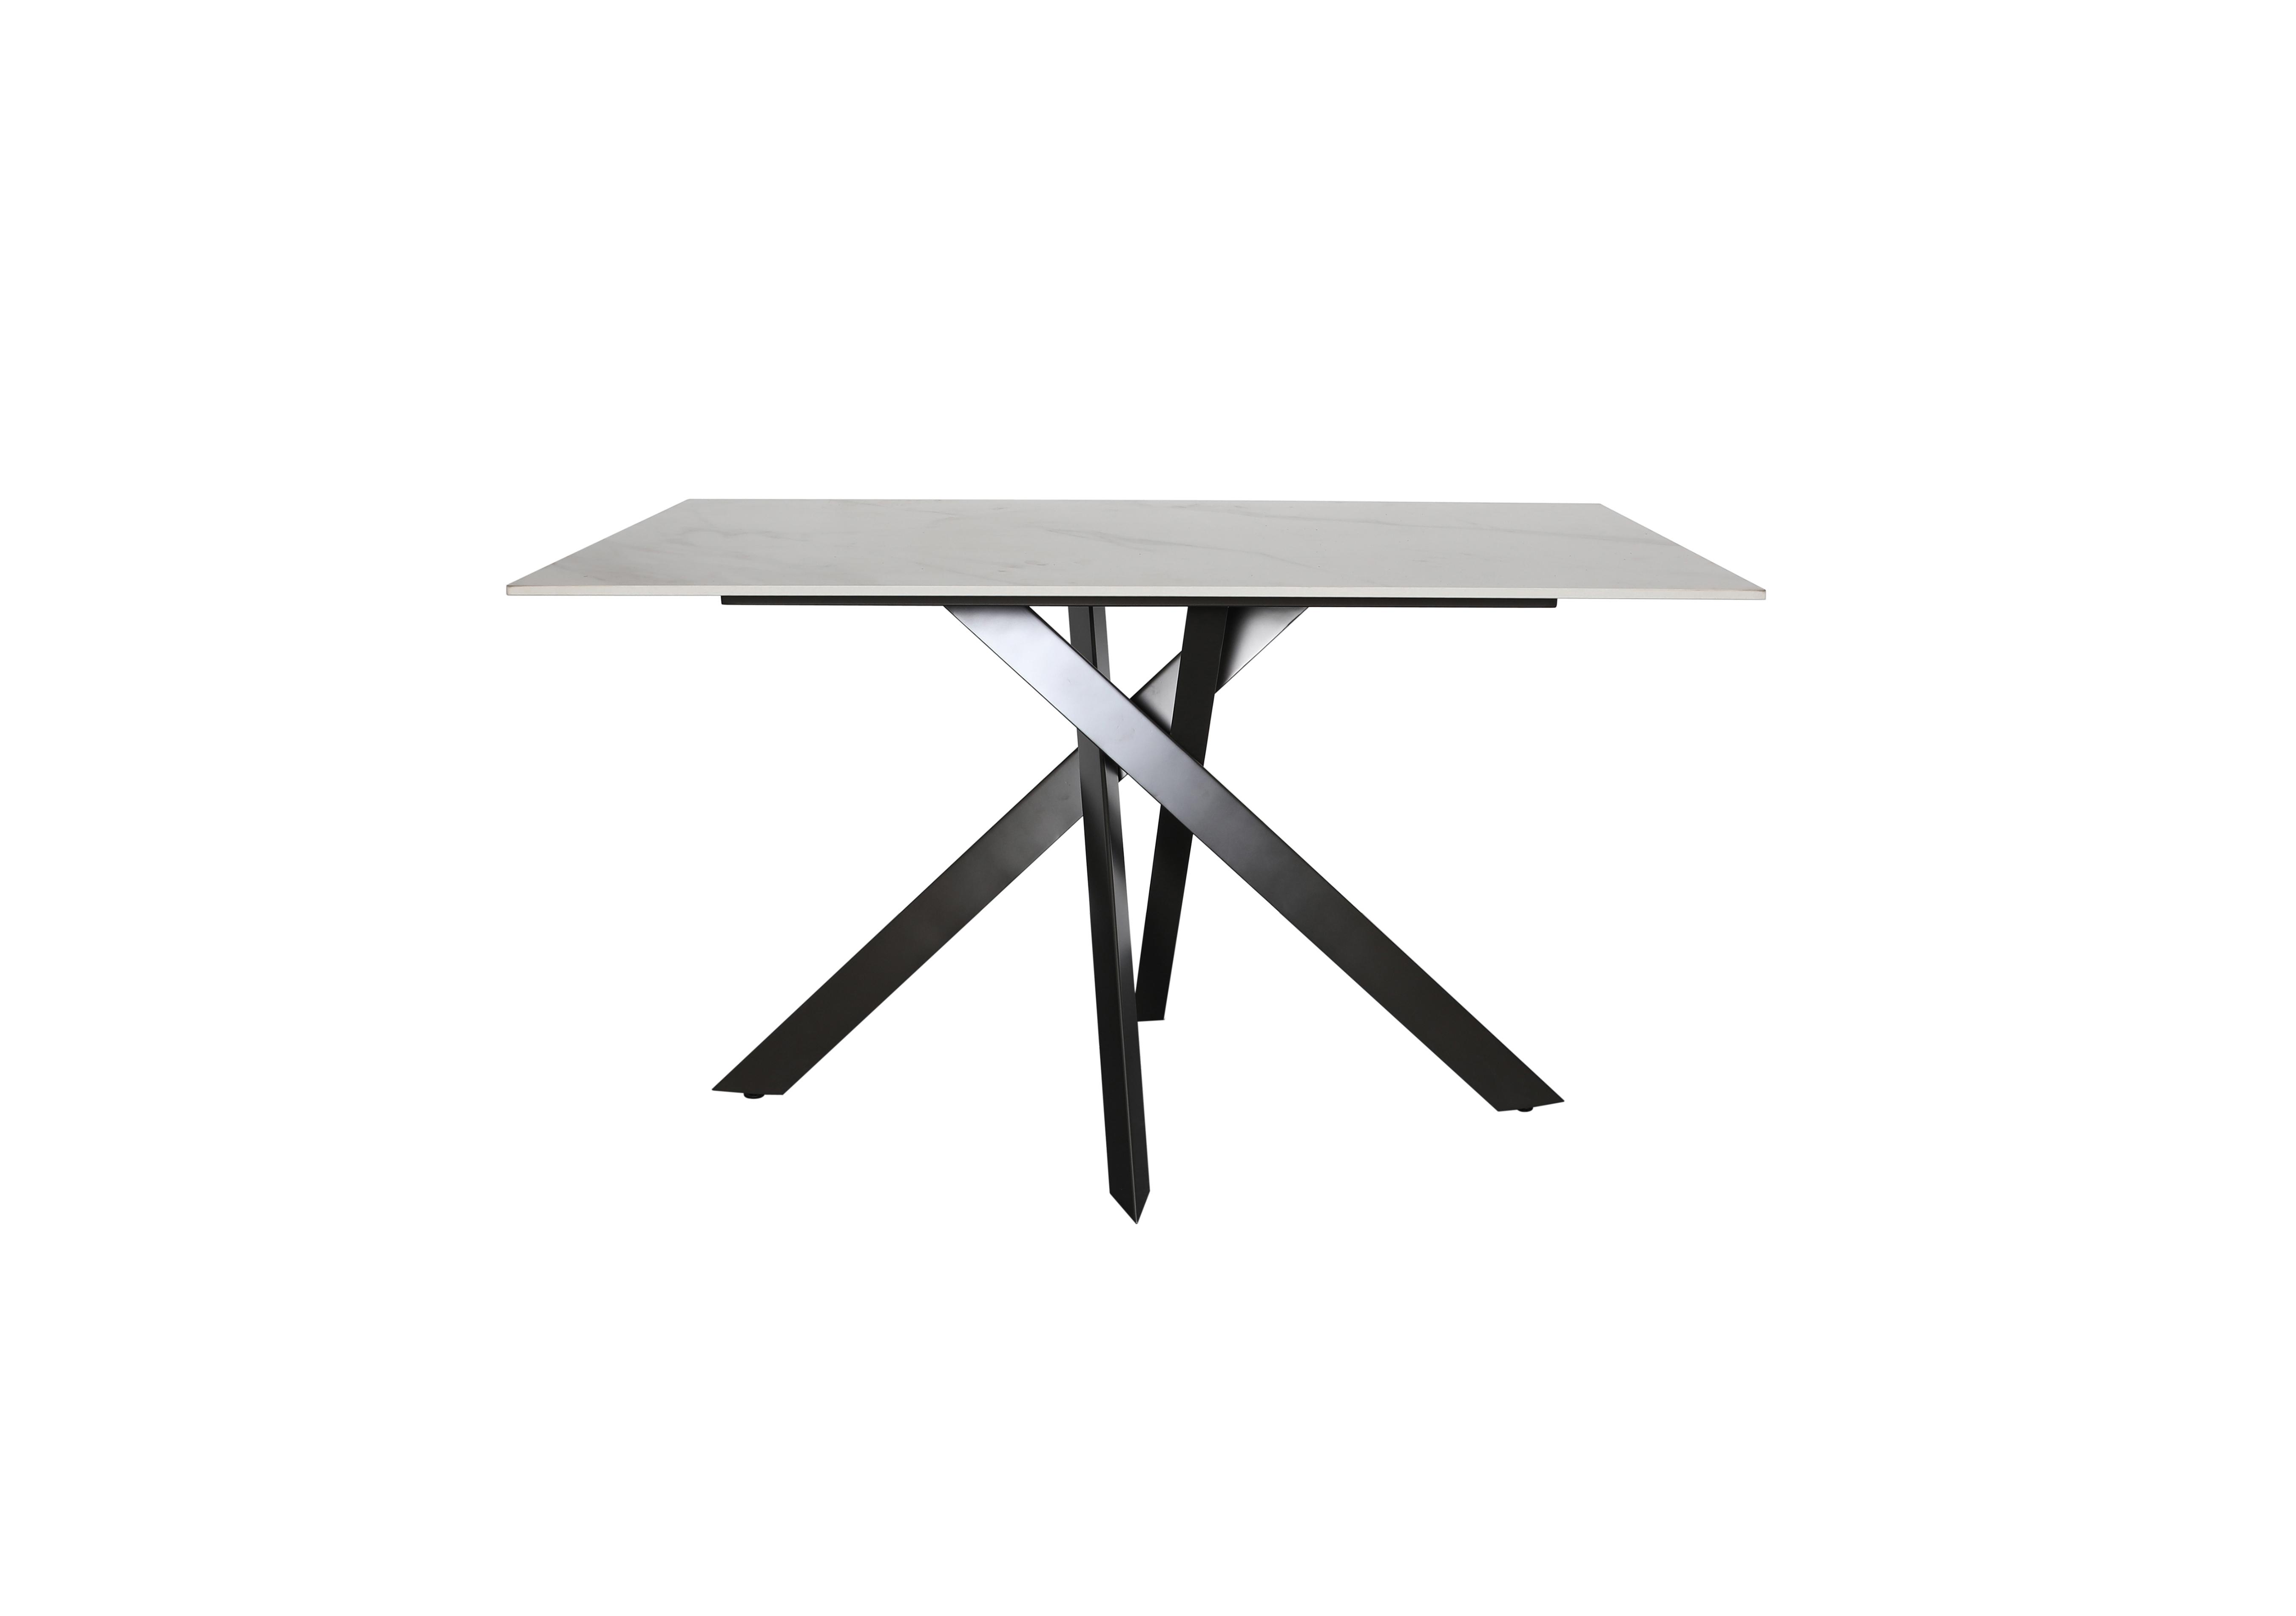 Samurai Compact Dining Table with White Ceramic Top in  on Furniture Village